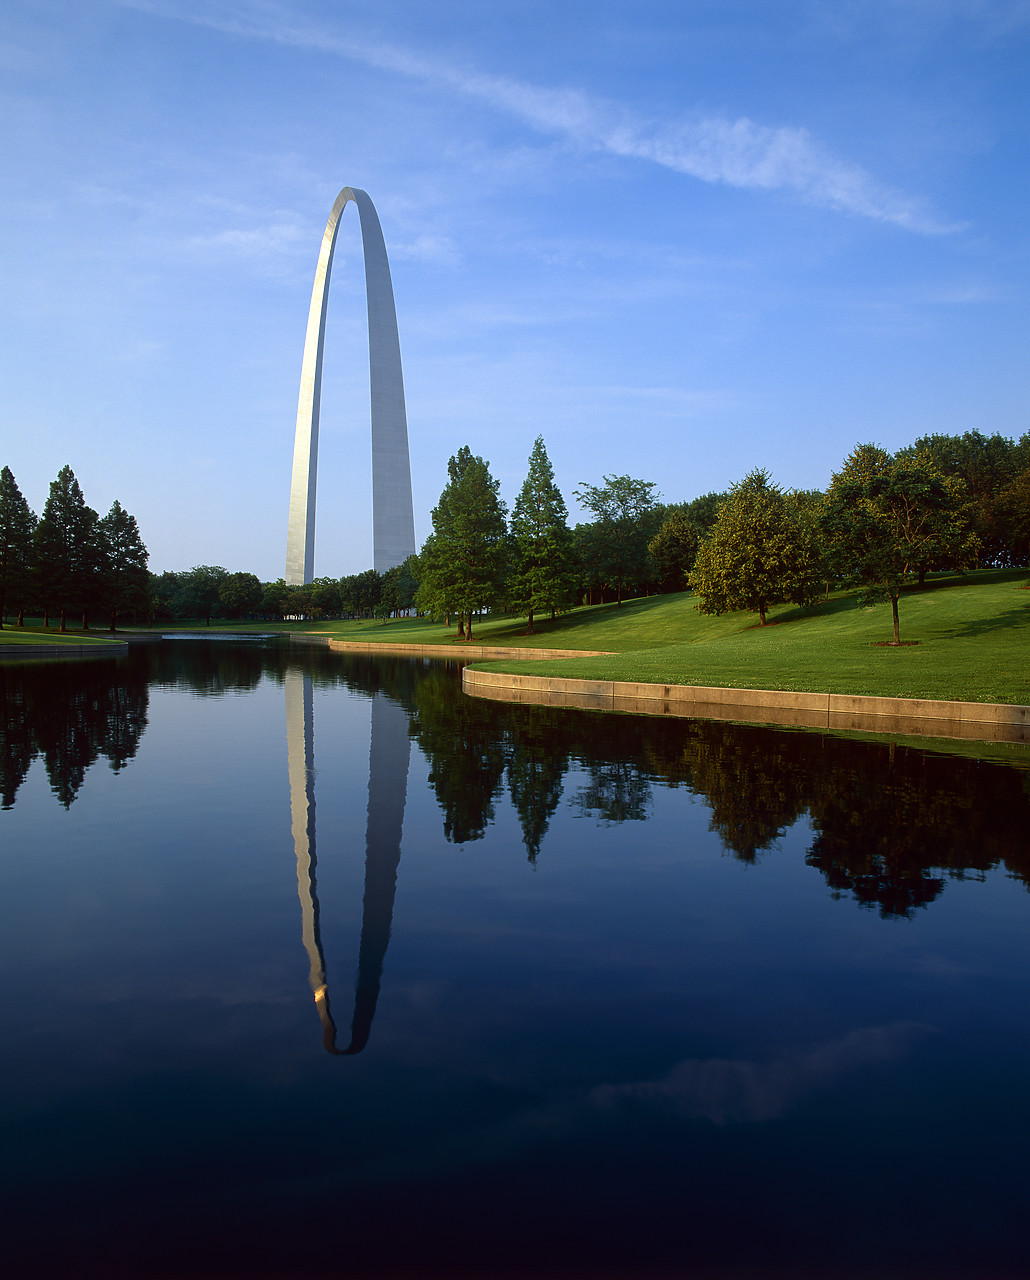 #200463-3 - The Arch Reflecting in Lake, St. Louis, Missouri, USA